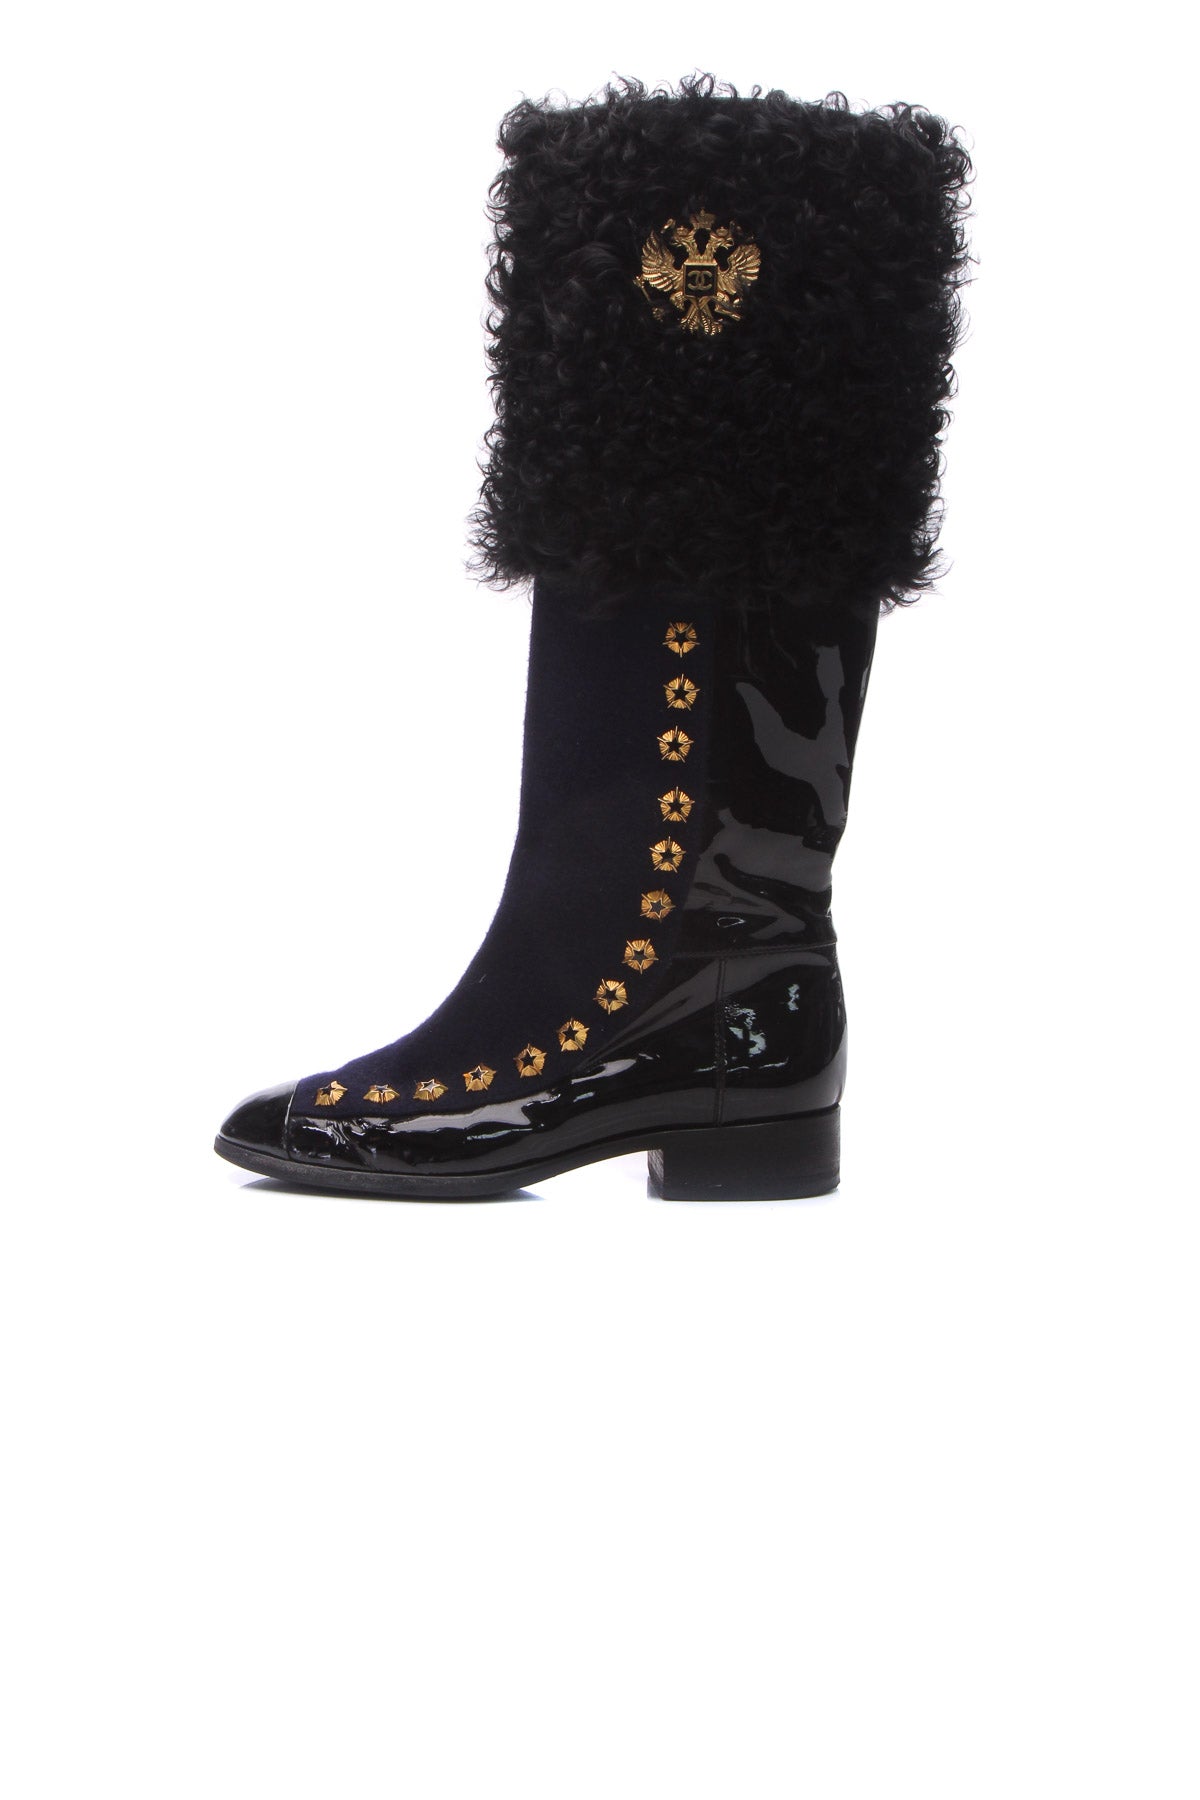 Chanel Moscow Boots - Size 39